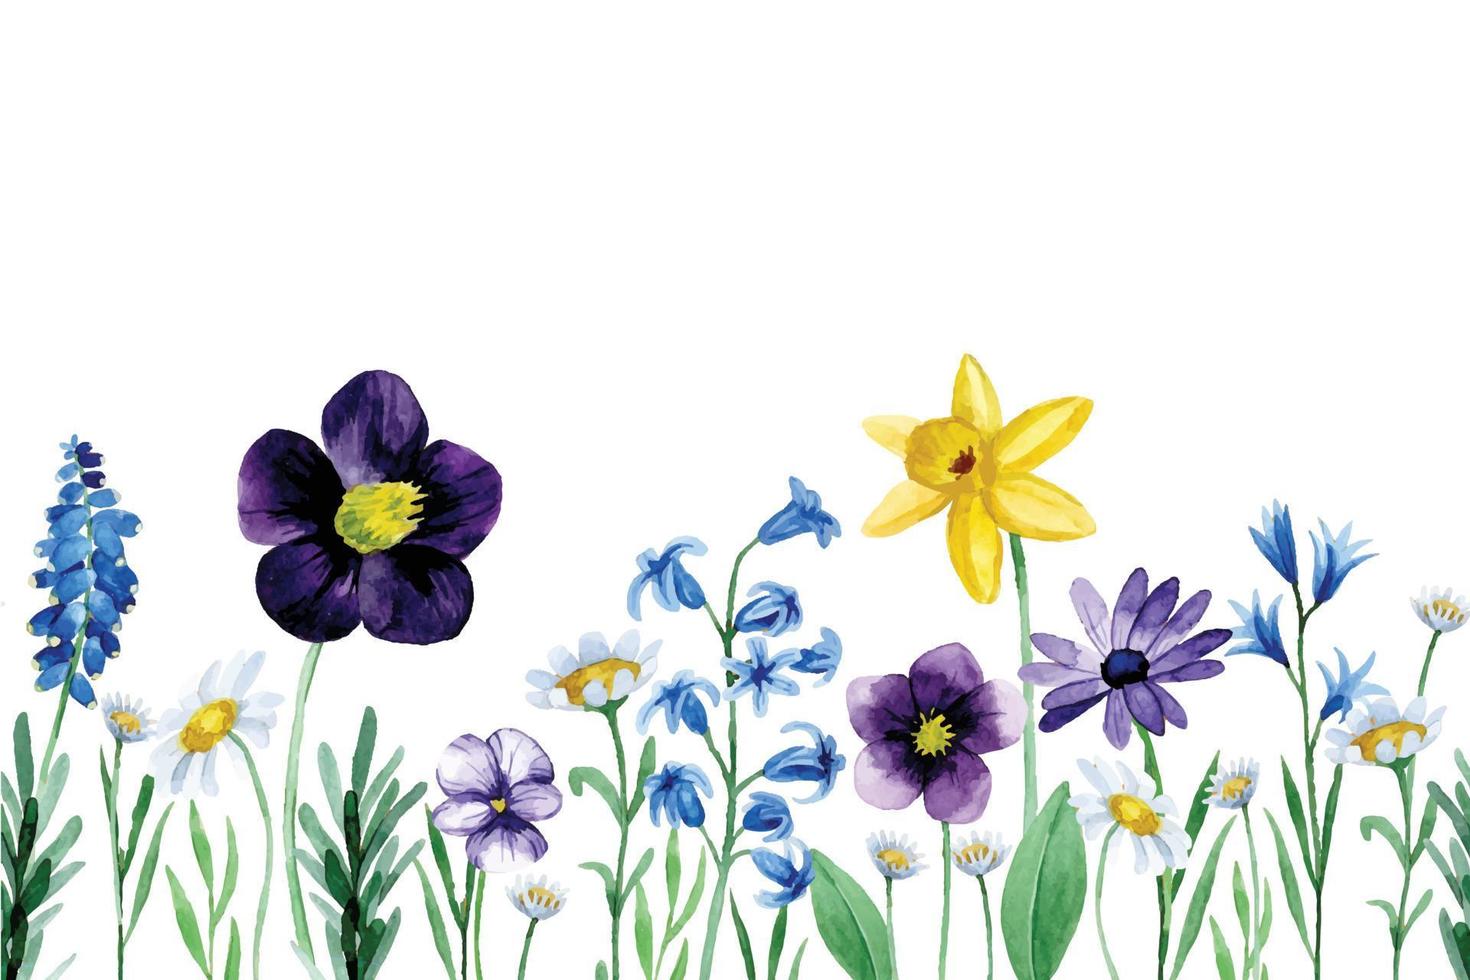 watercolor drawing with cute wildflowers. seamless border, spring flowers vector